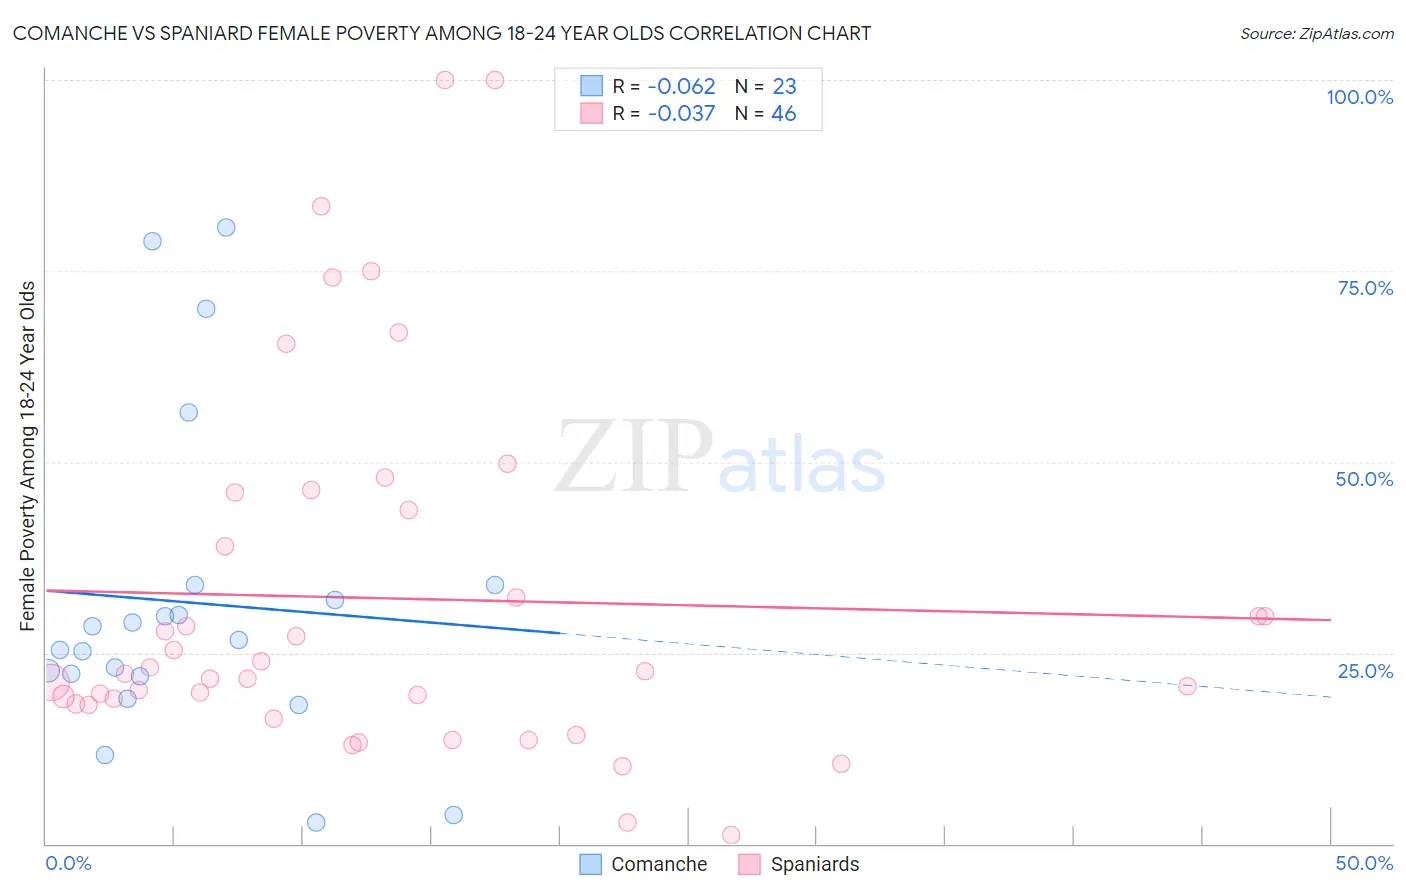 Comanche vs Spaniard Female Poverty Among 18-24 Year Olds